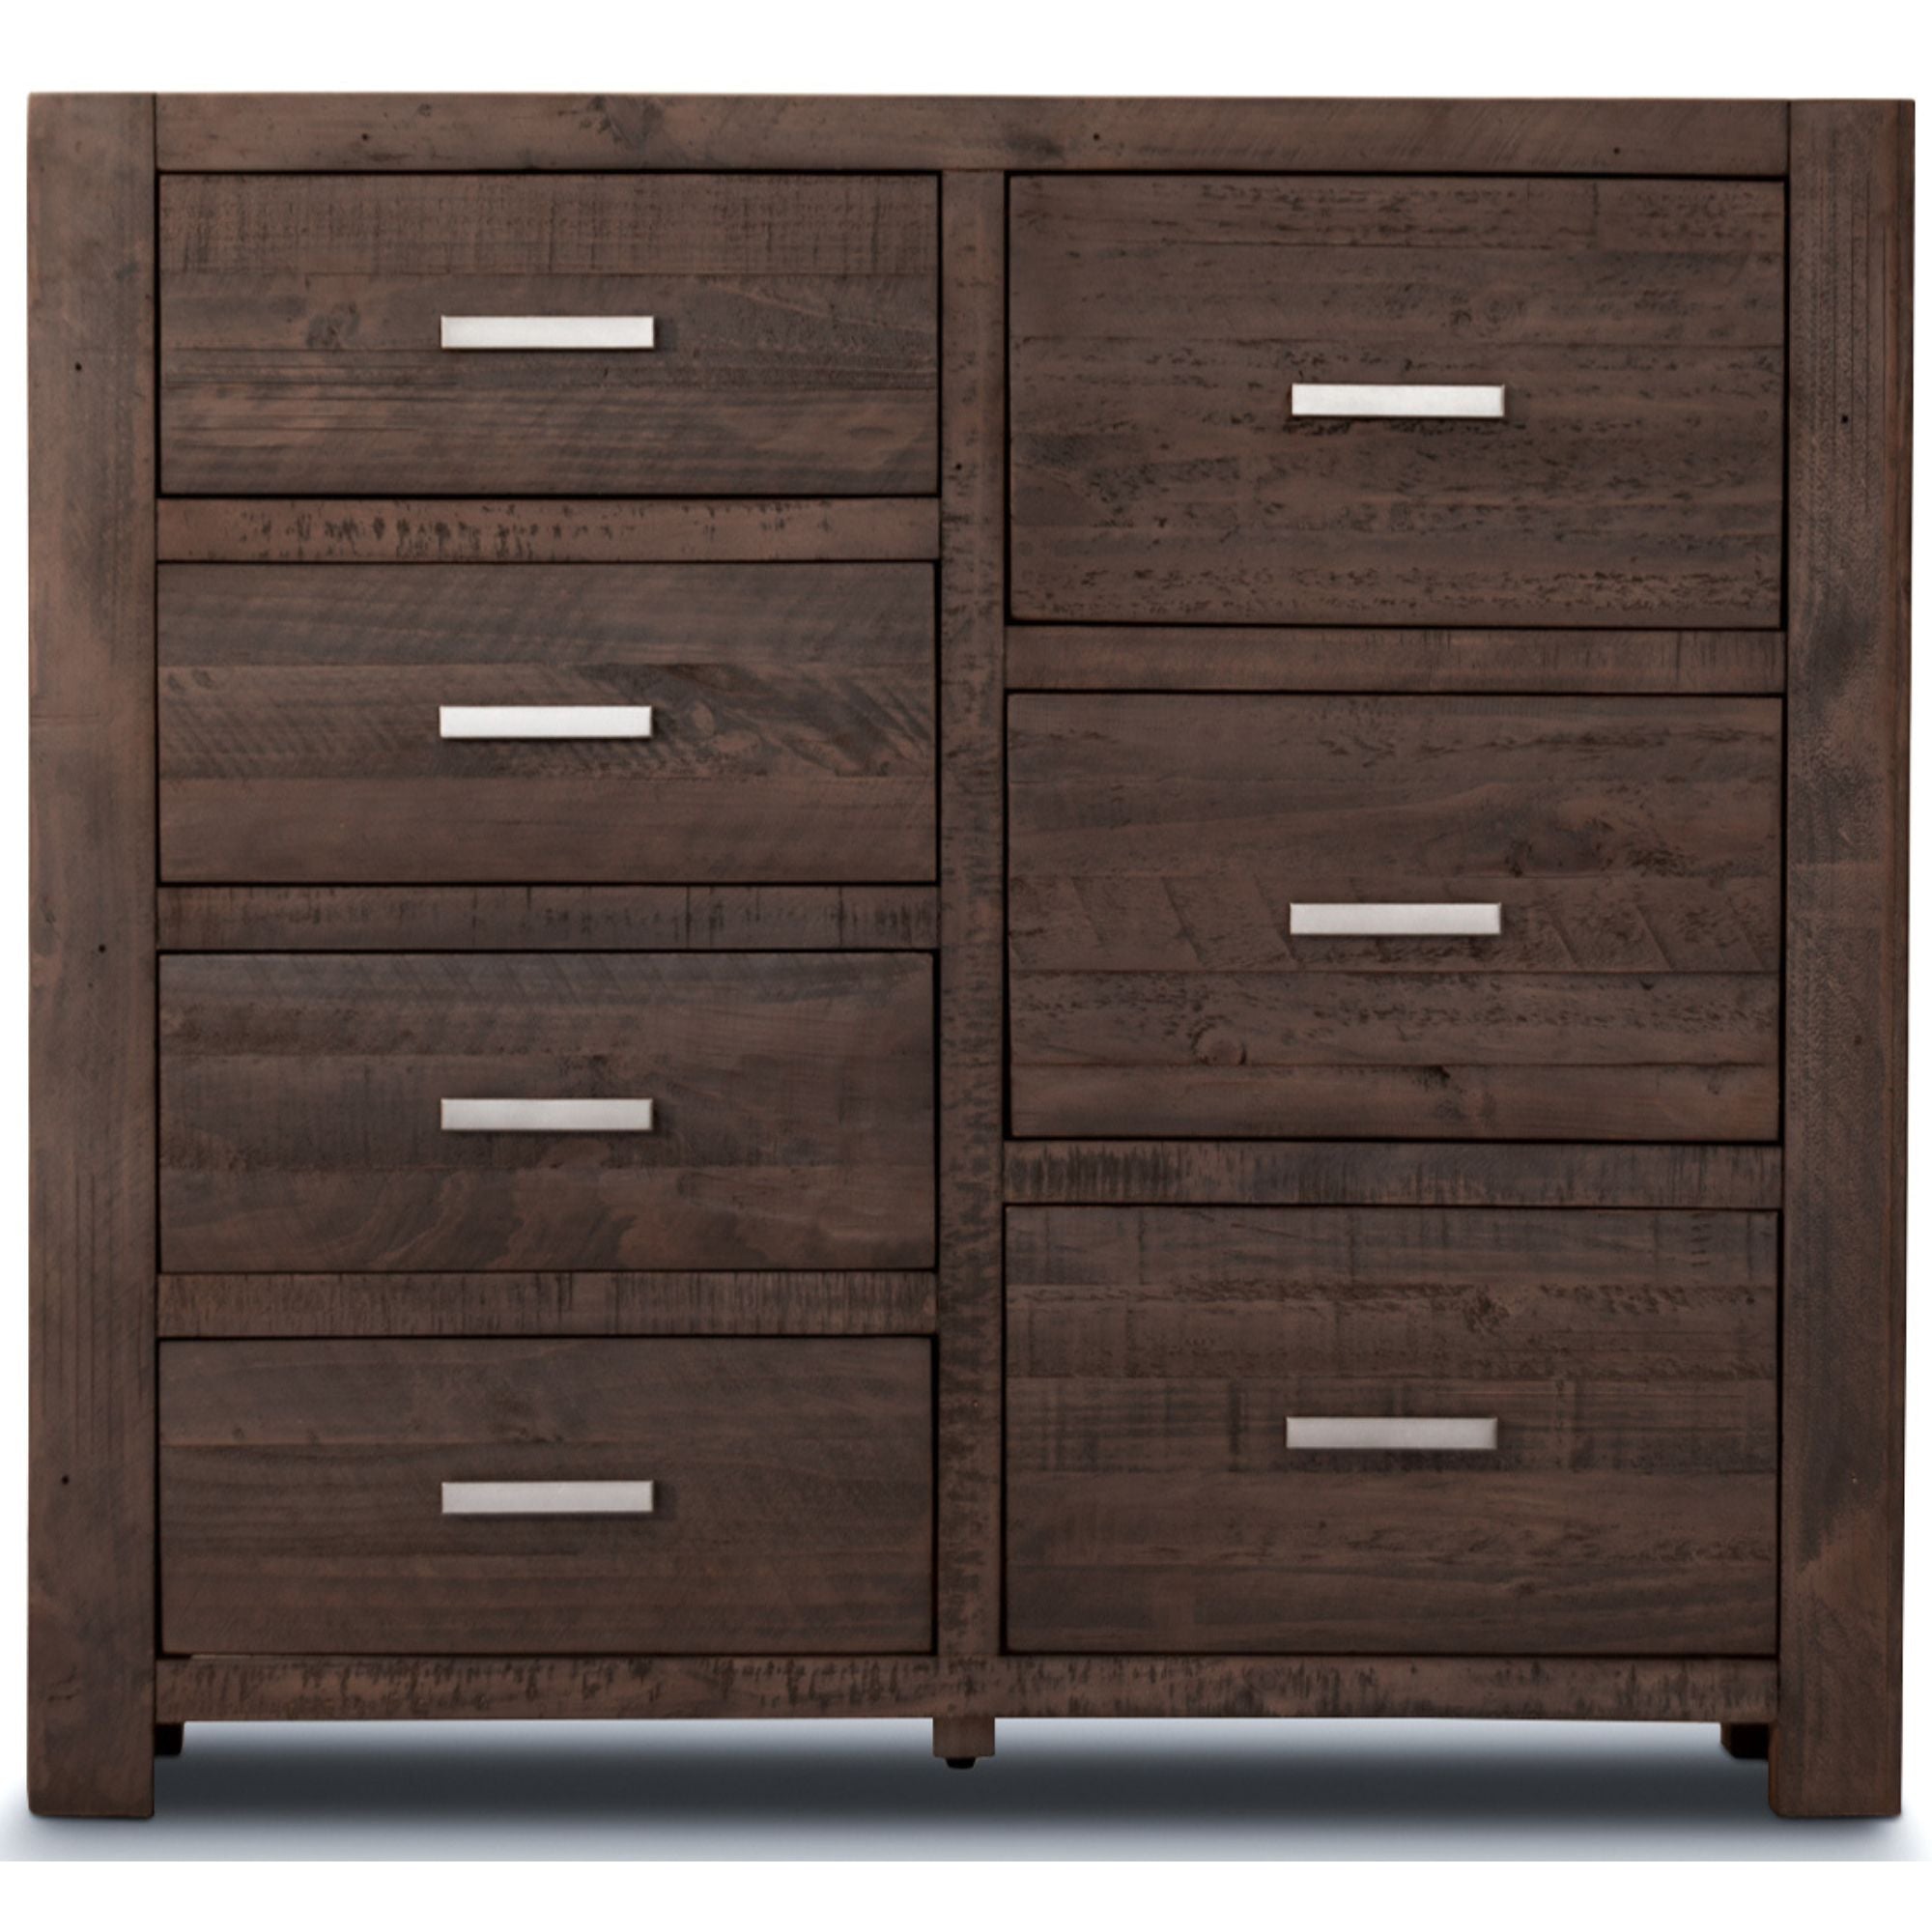 Tallboy 7 Chest Of Drawers Pine Wood Bed Storage Cabinet - Grey Stone